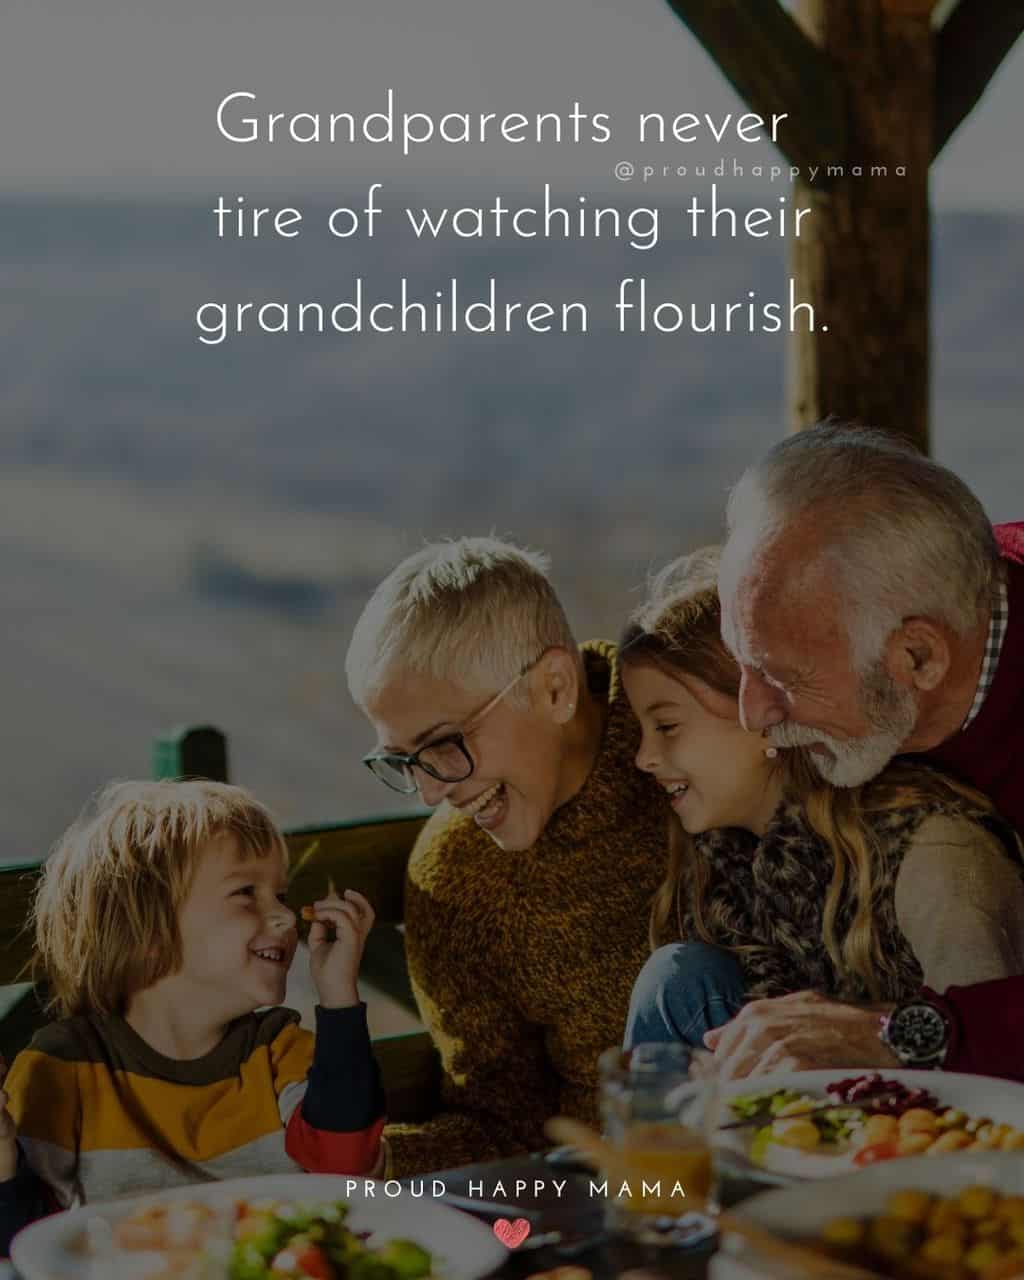 Grandparent Quotes – There are many people that have inspired me in my life, but no one as much as much grandparents!